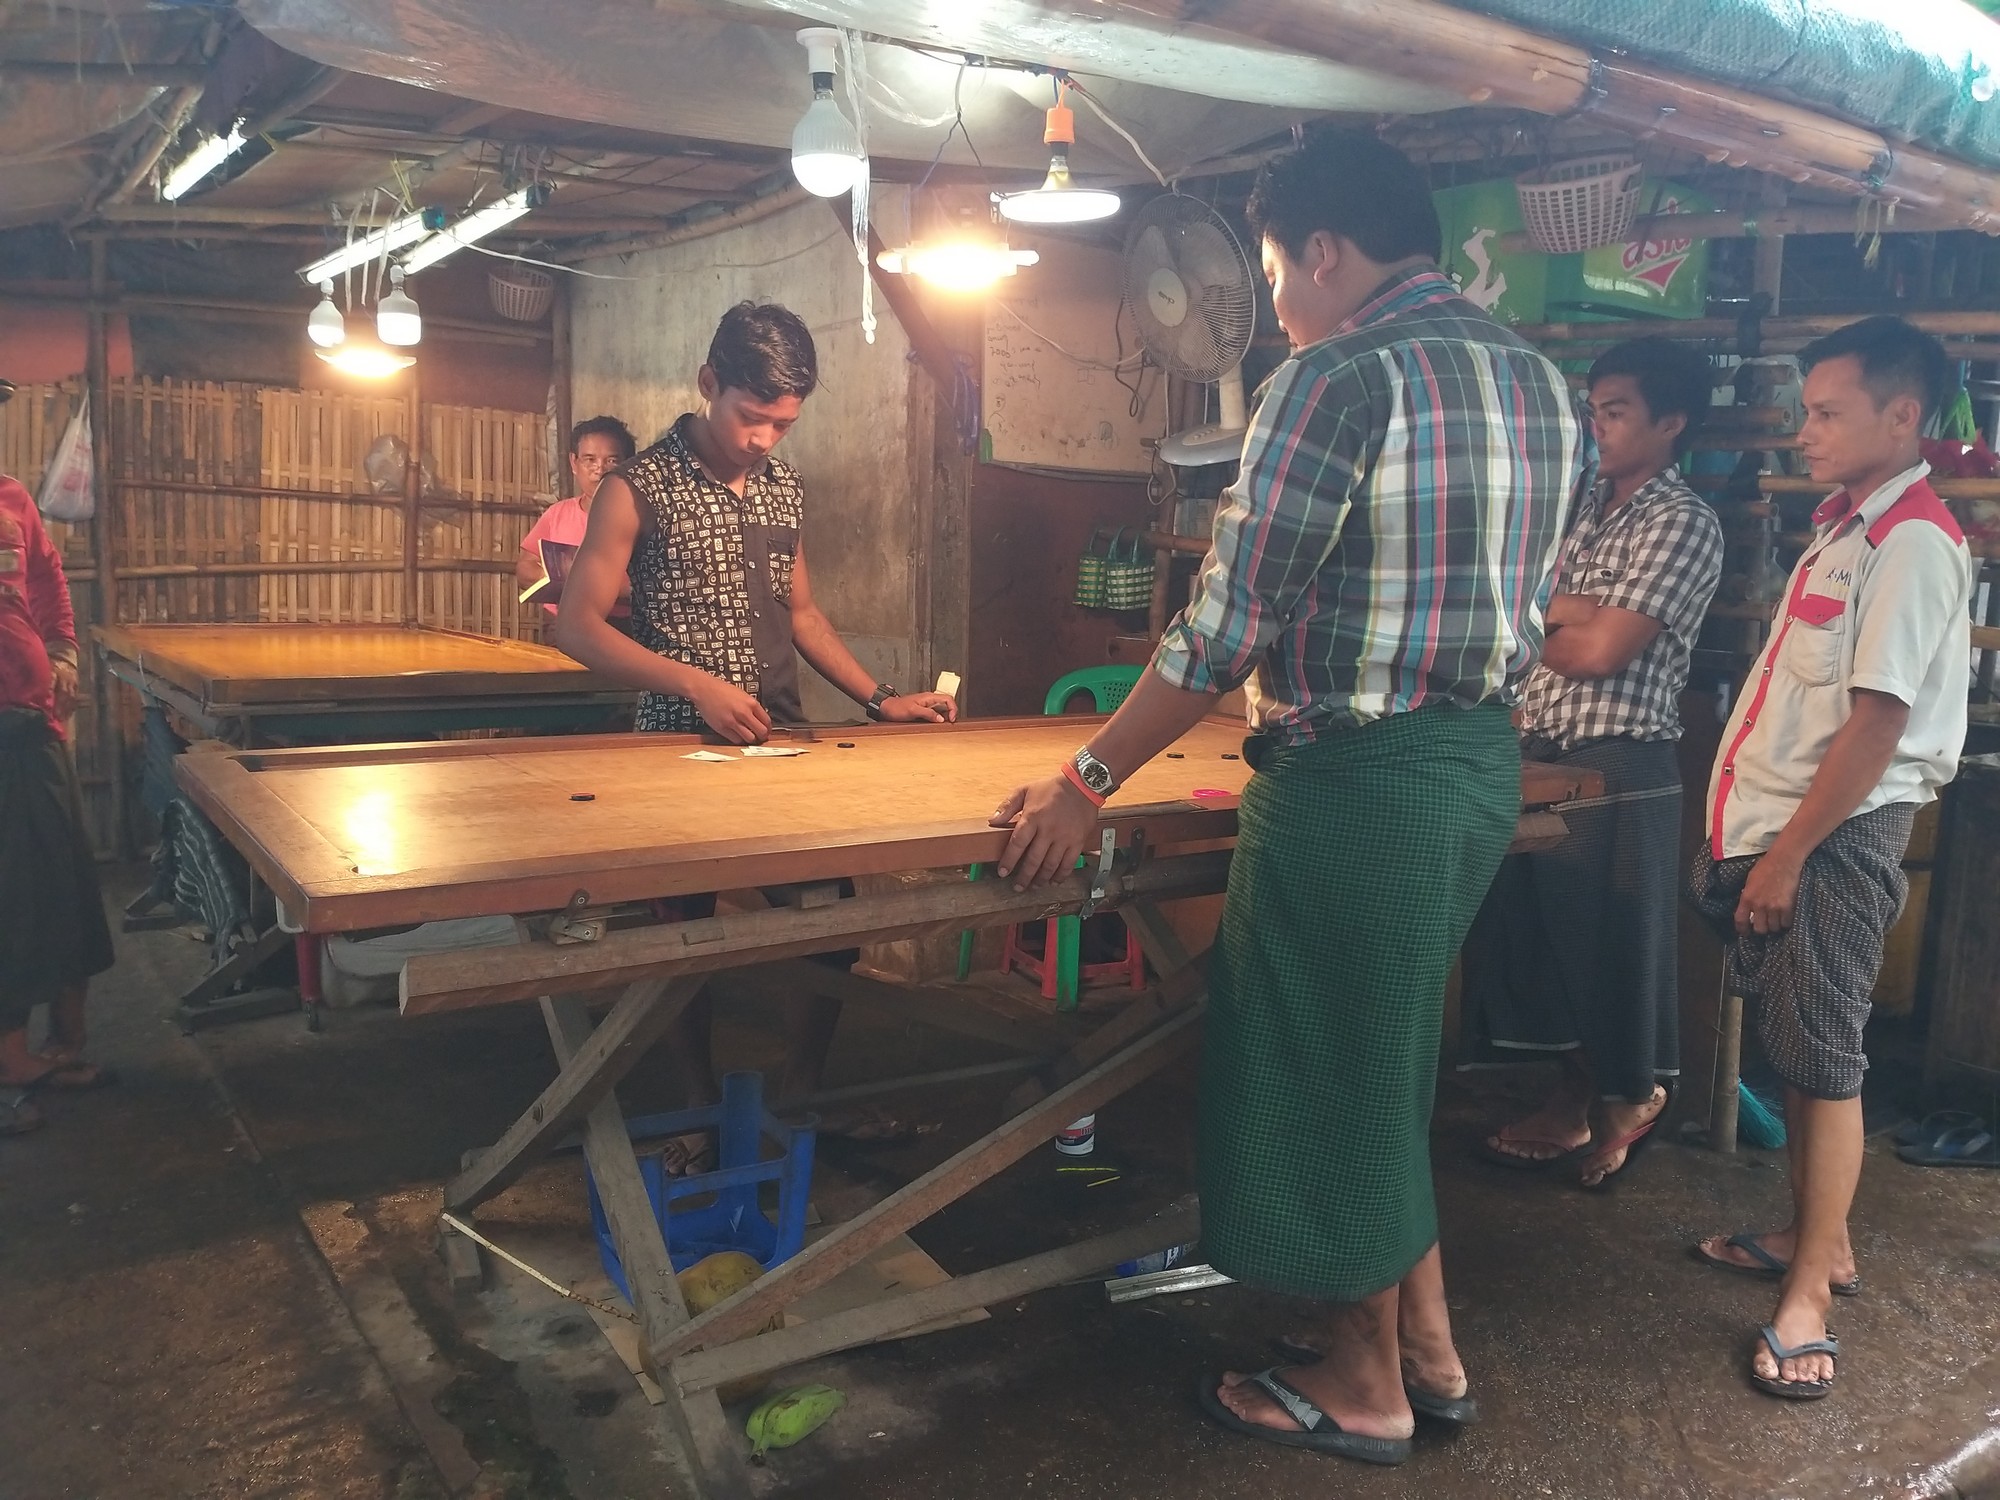 Inbetween shifts market workers chill playing carrom